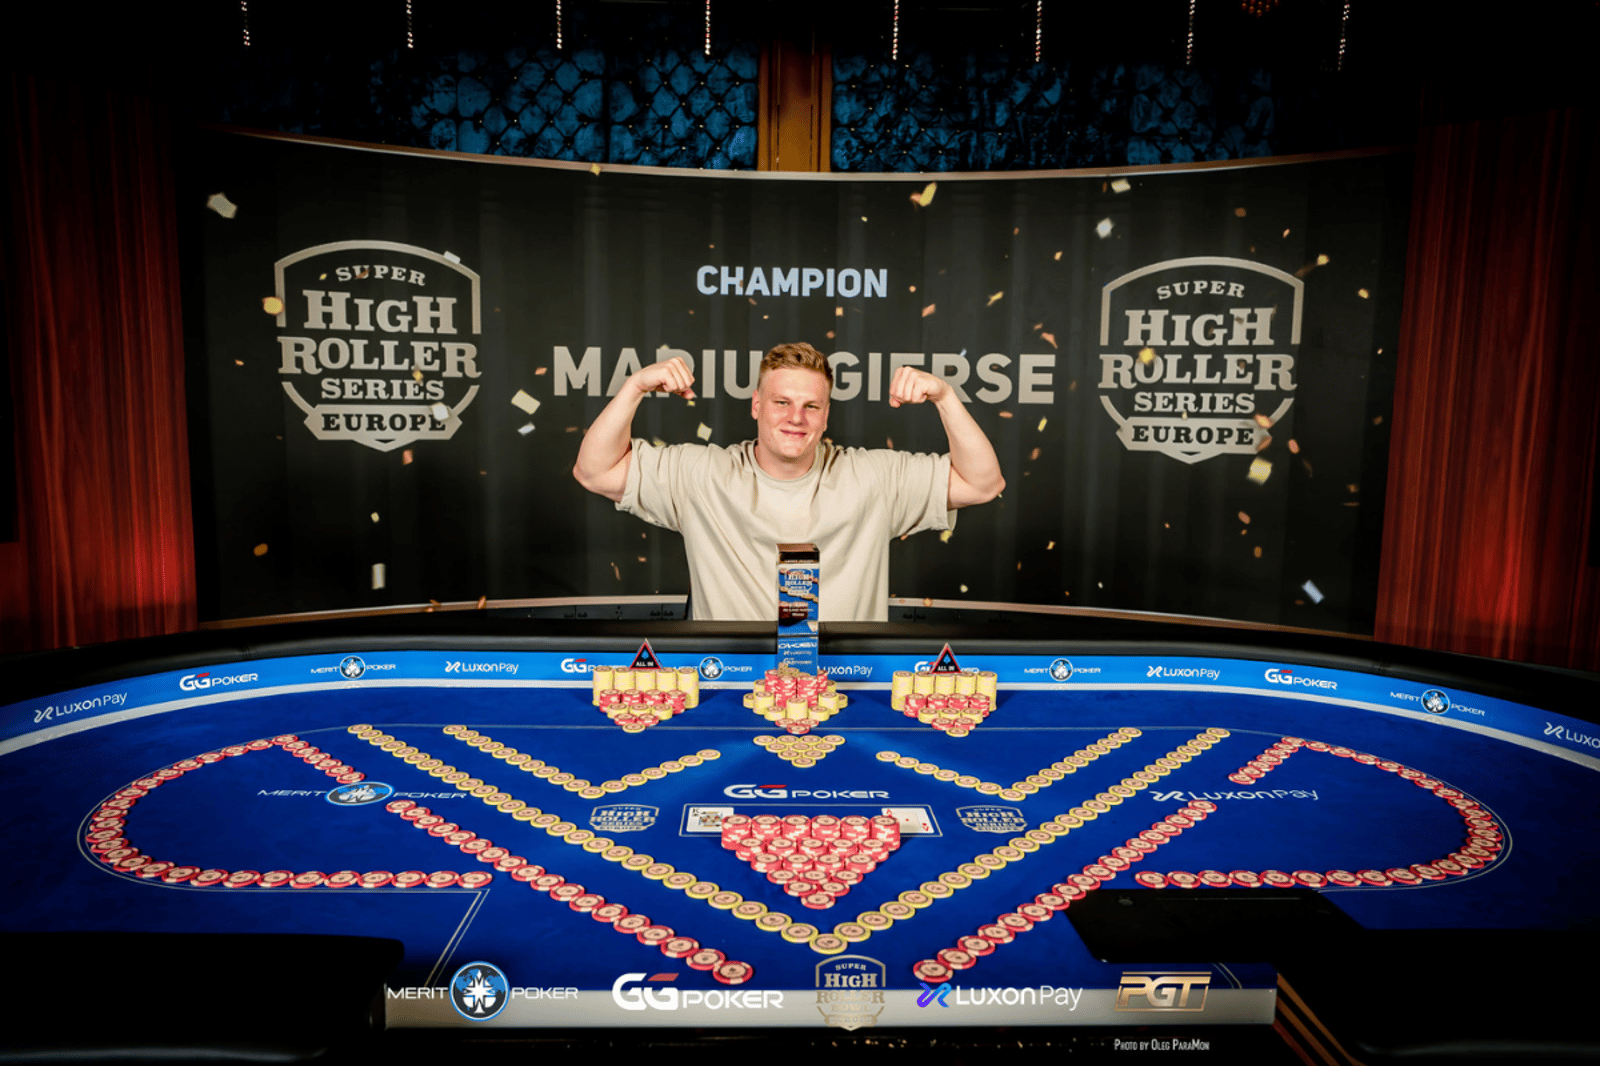 Marius Gierse Wins Super High Roller Series Event #3 for $432,000